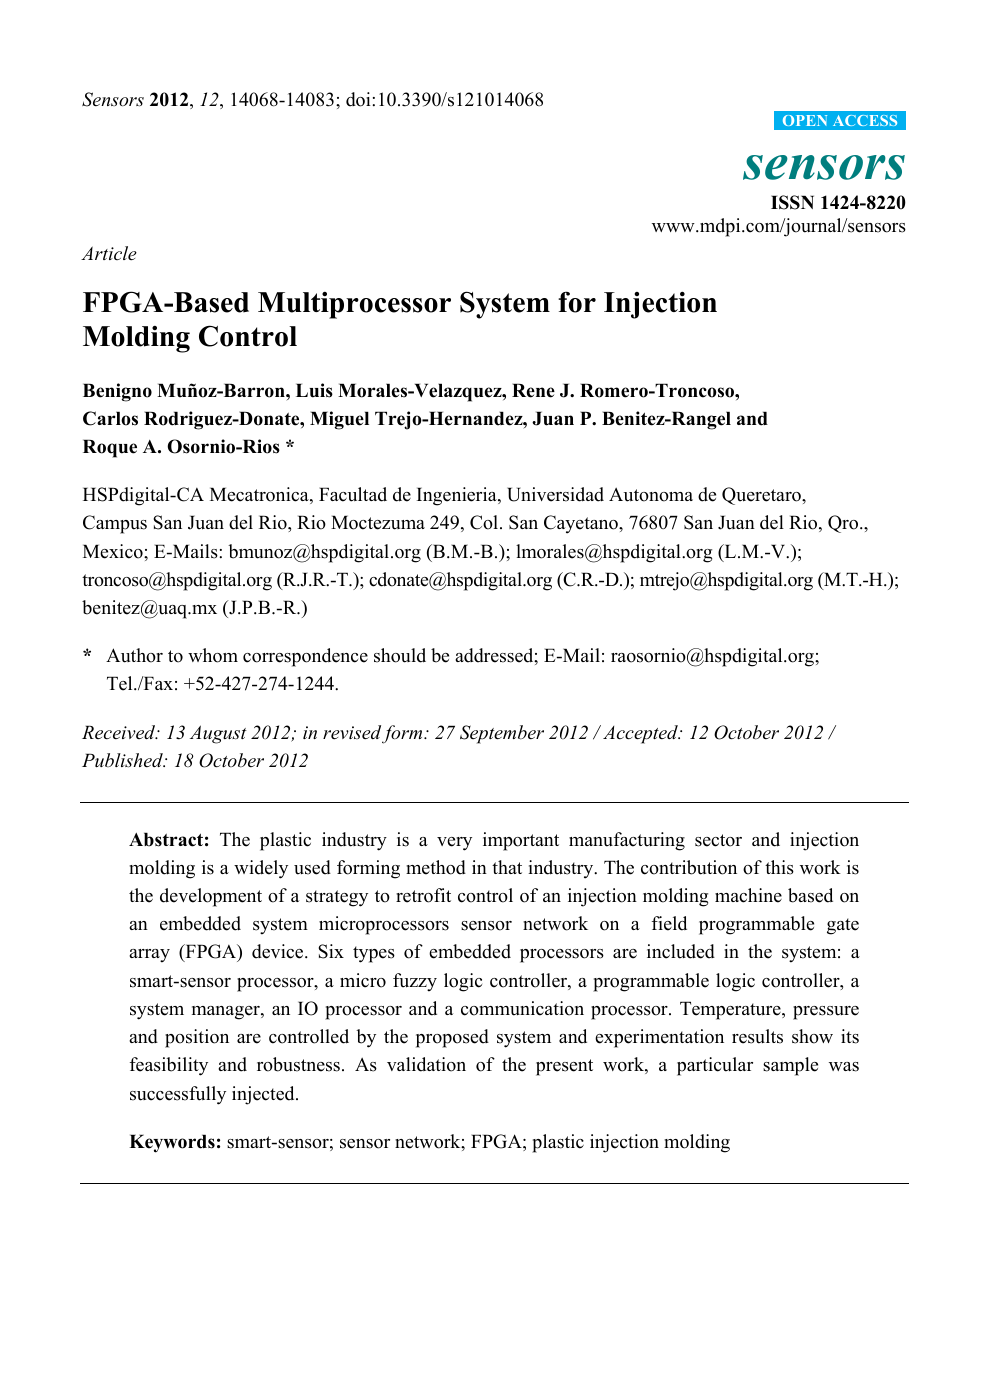 Fpga Based Multiprocessor System For Injection Molding Control Topic Of Research Paper In Electrical Engineering Electronic Engineering Information Engineering Download Scholarly Article Pdf And Read For Free On Cyberleninka Open Science Hub